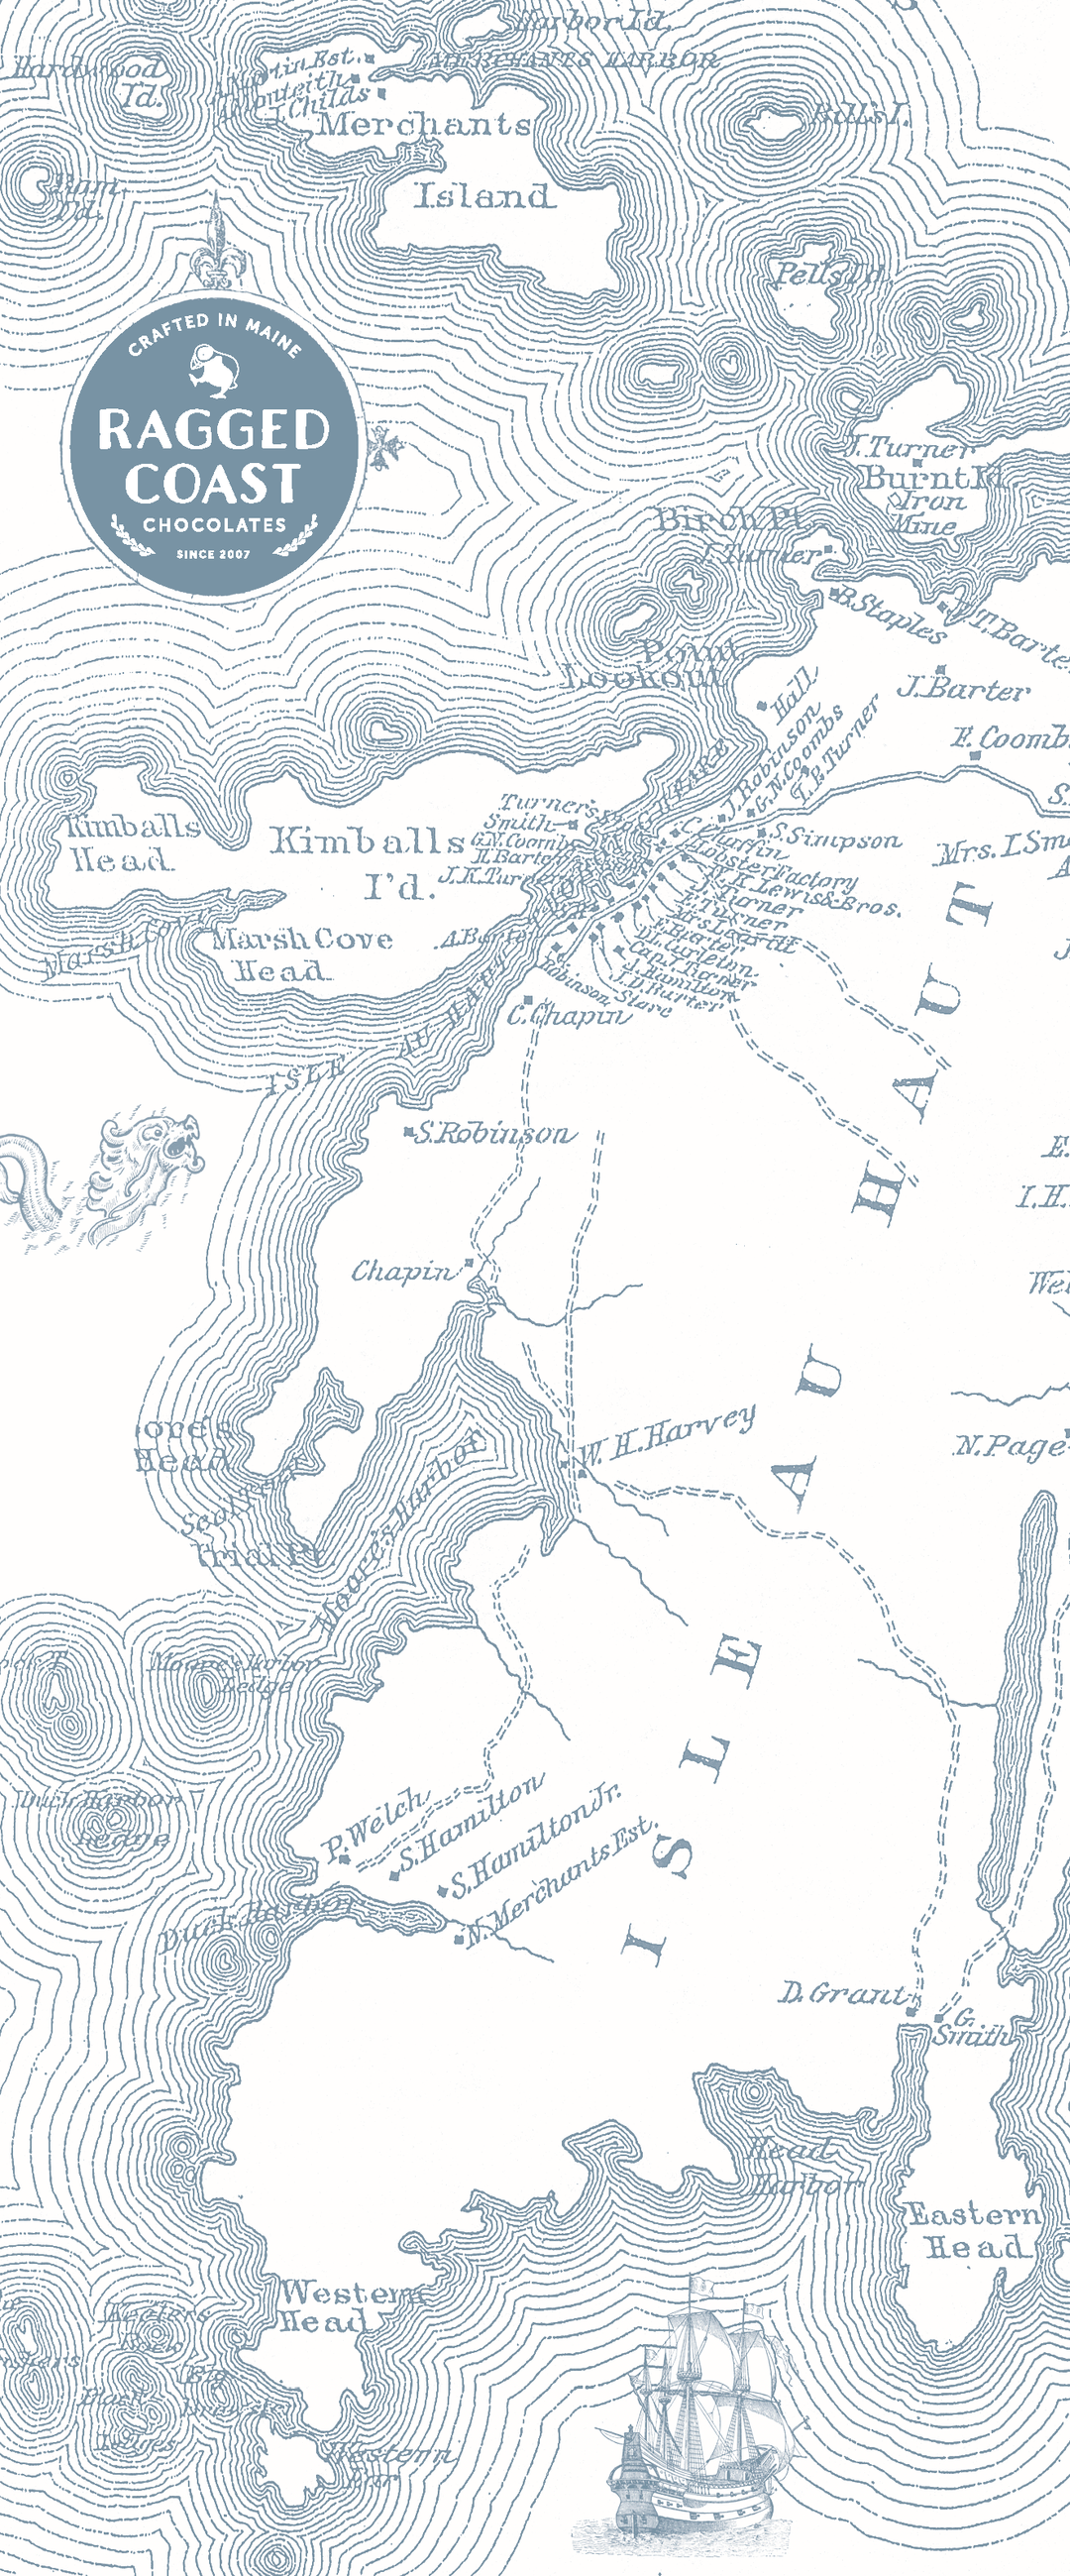 Illustrated nautical 1882 map featuring the ragged coast of Isle au Haut with topographical details, compass rose, and a sailing ship on a Customized Scroll by Ragged Coast Chocolates.